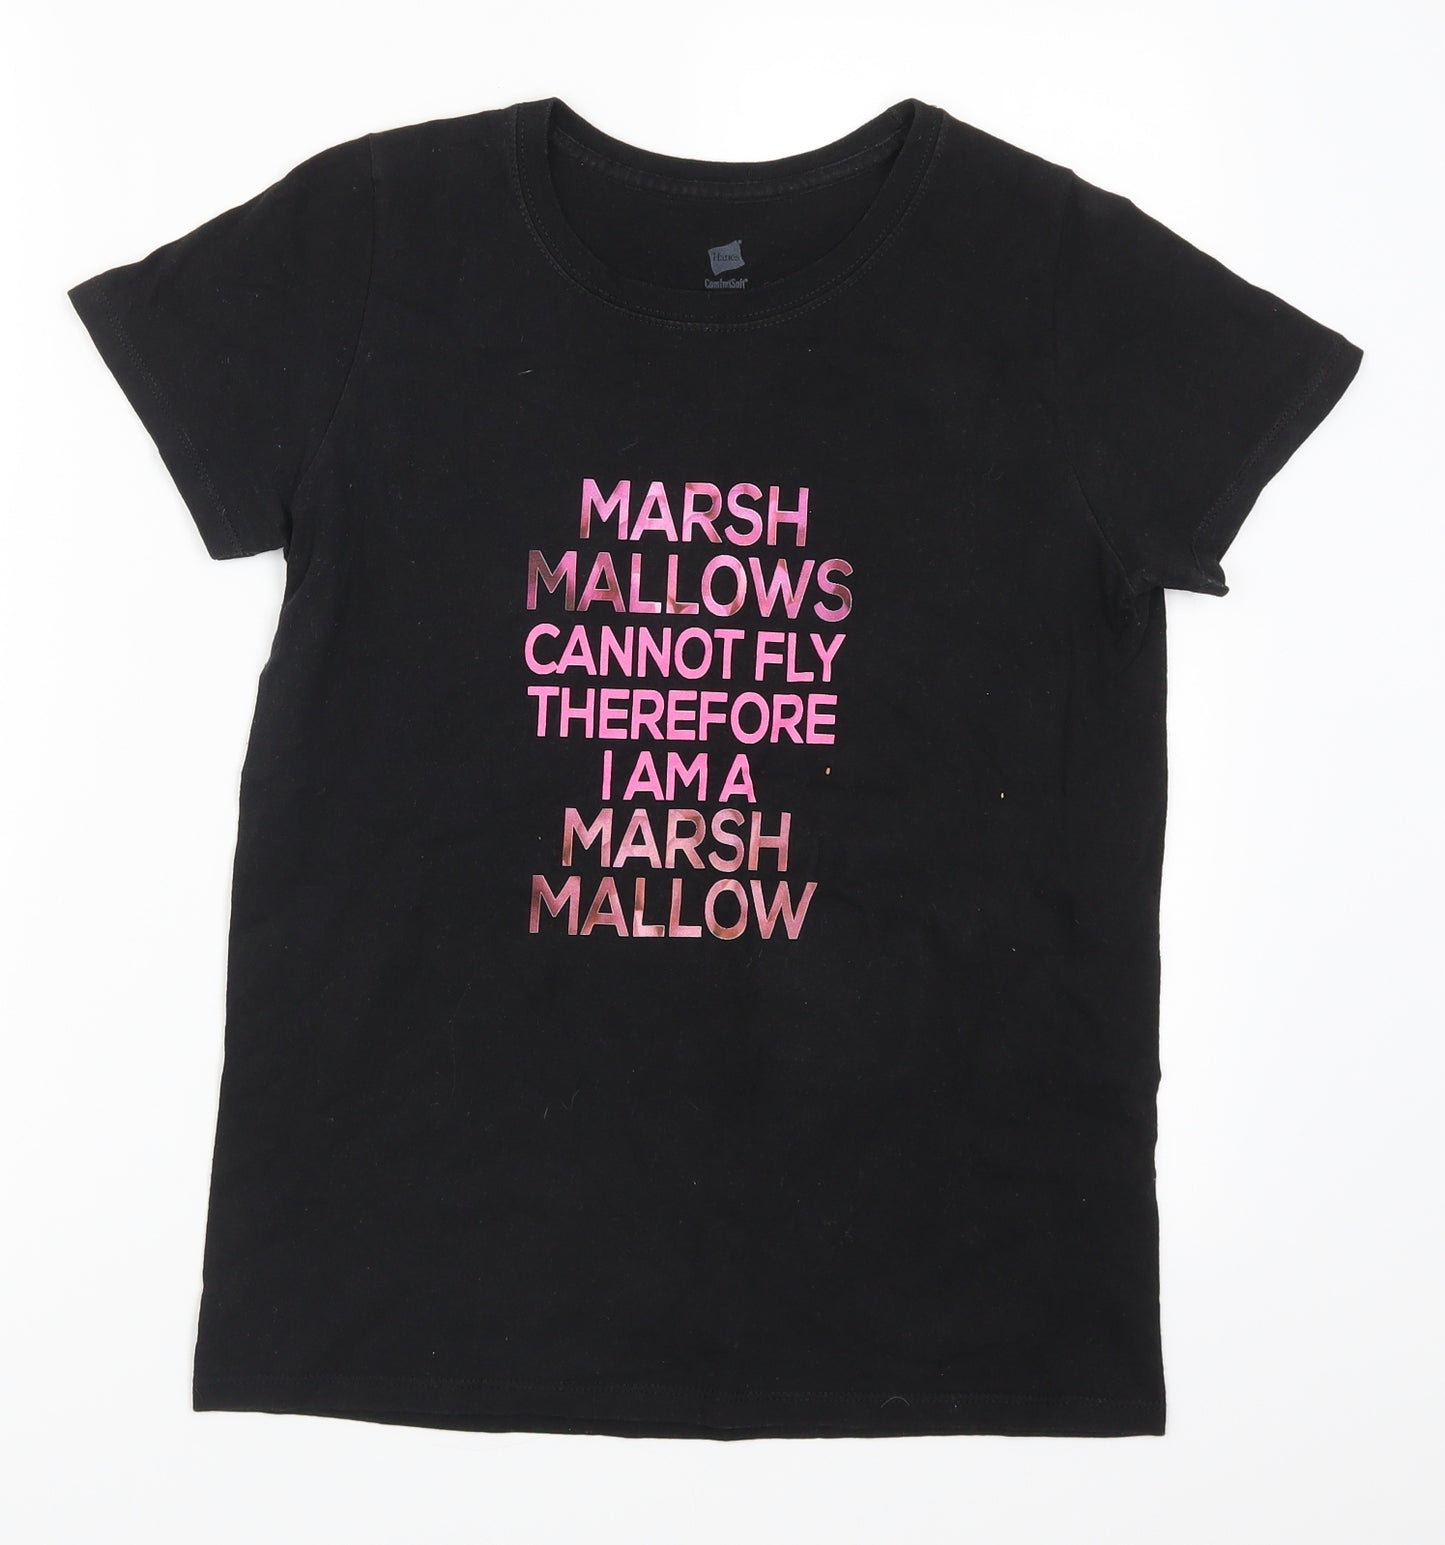 Hanes Womens Black   Basic T-Shirt Size S  - Marshmallows Can Not Fly Therefore I am a Marshmallow